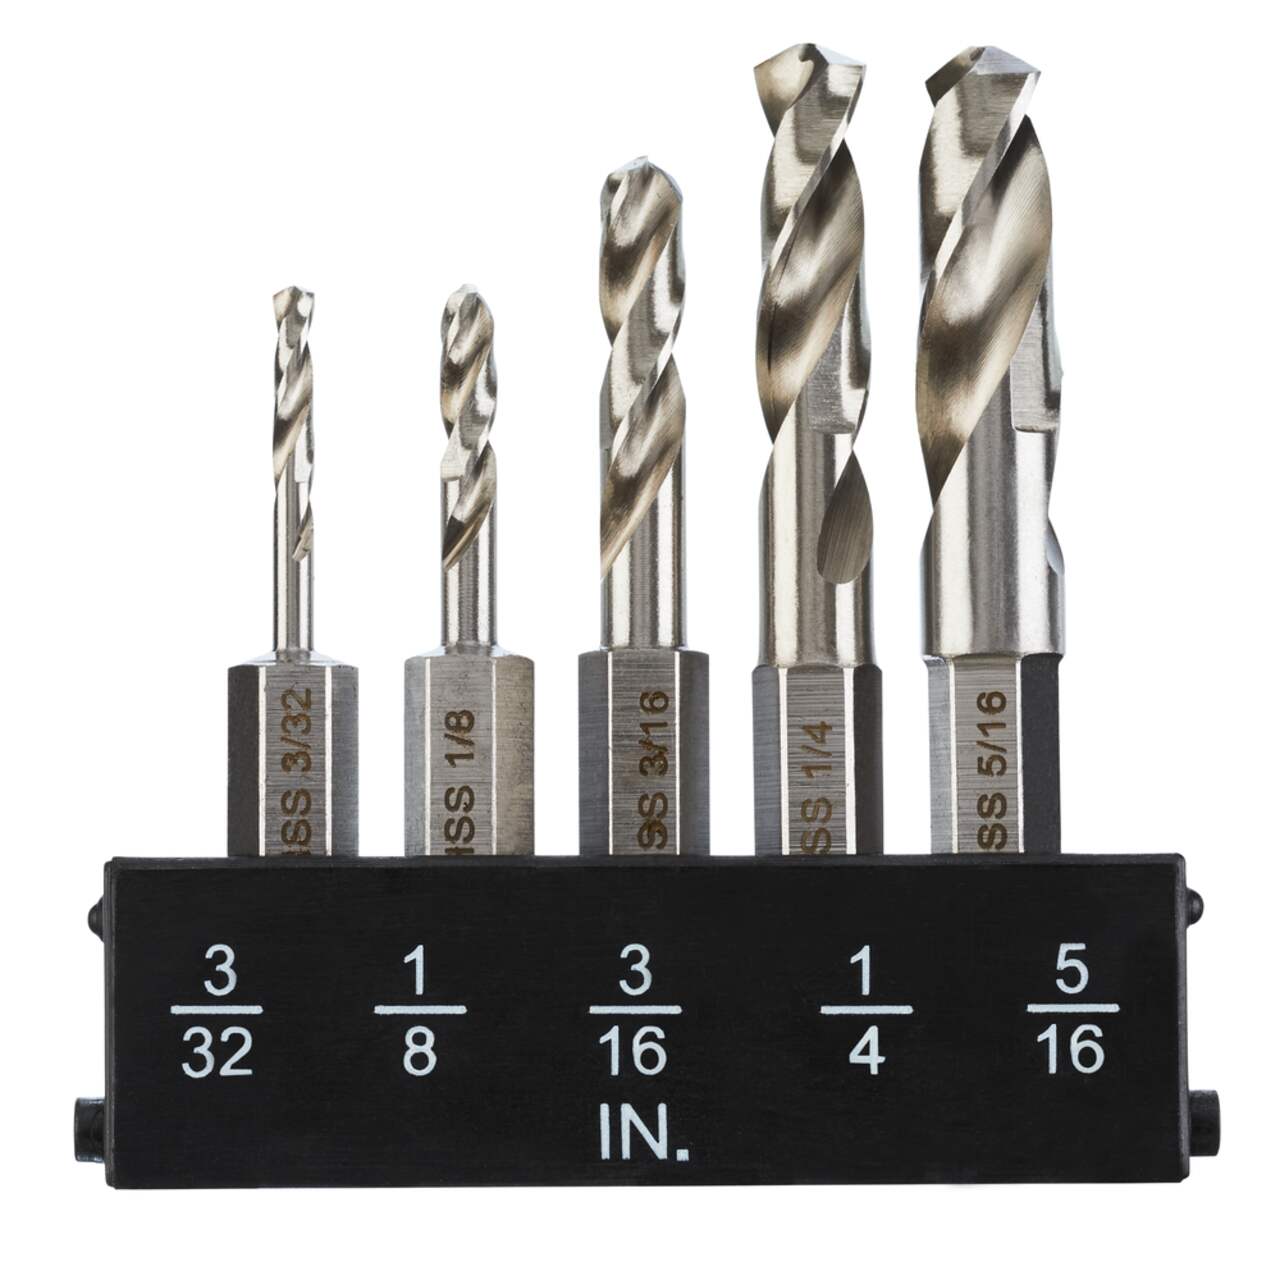 5pcs 1/4 Quick Change Hex Shank Metal Stubby Drill Bits Short Drill Bit  Set HSS M2 for Right-Angle Drill Attachment and Used in Tight Spaces, 3/32